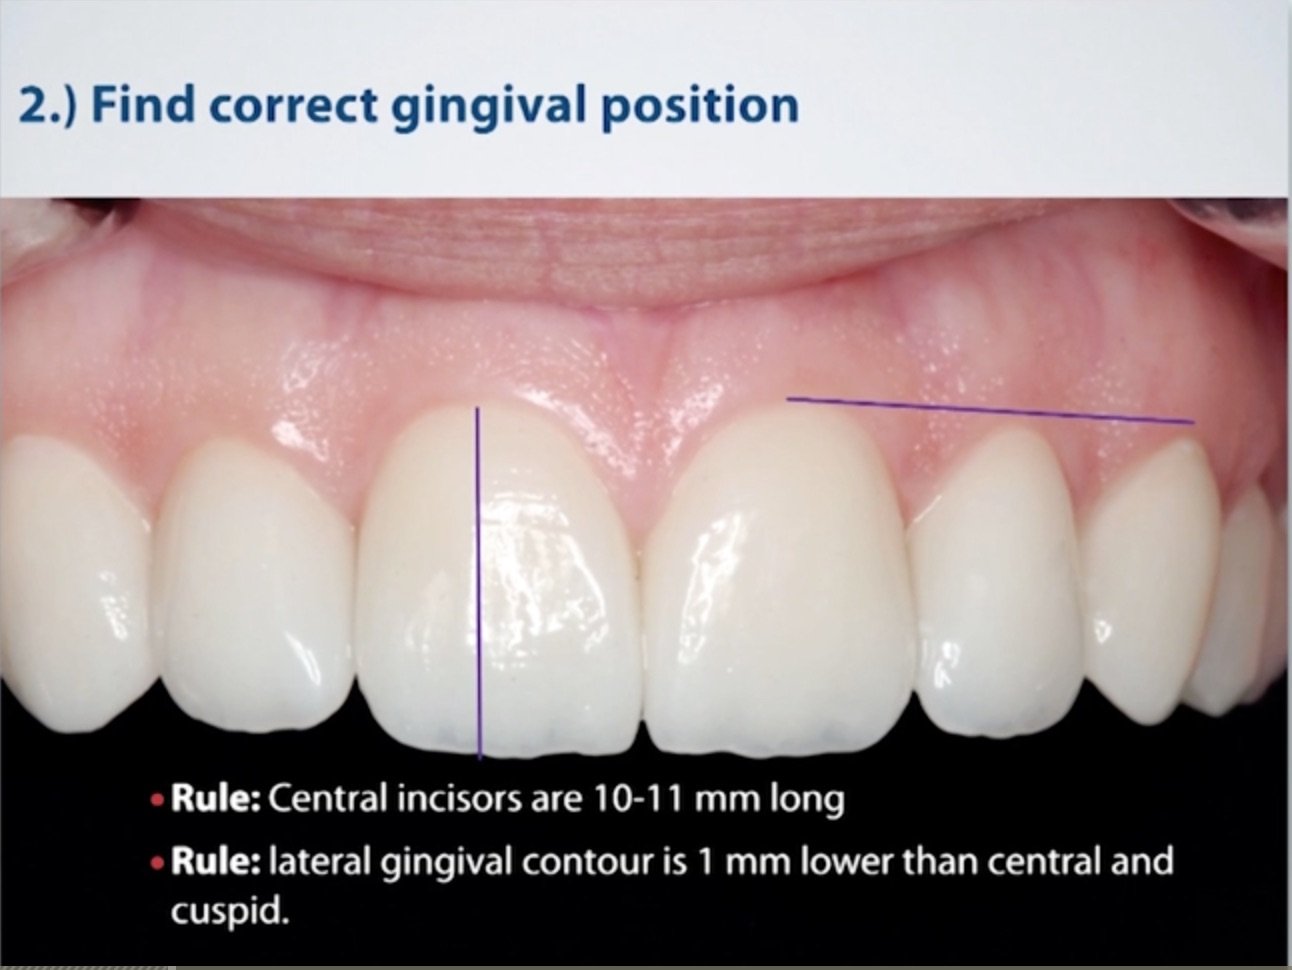 Correct Gingival Position